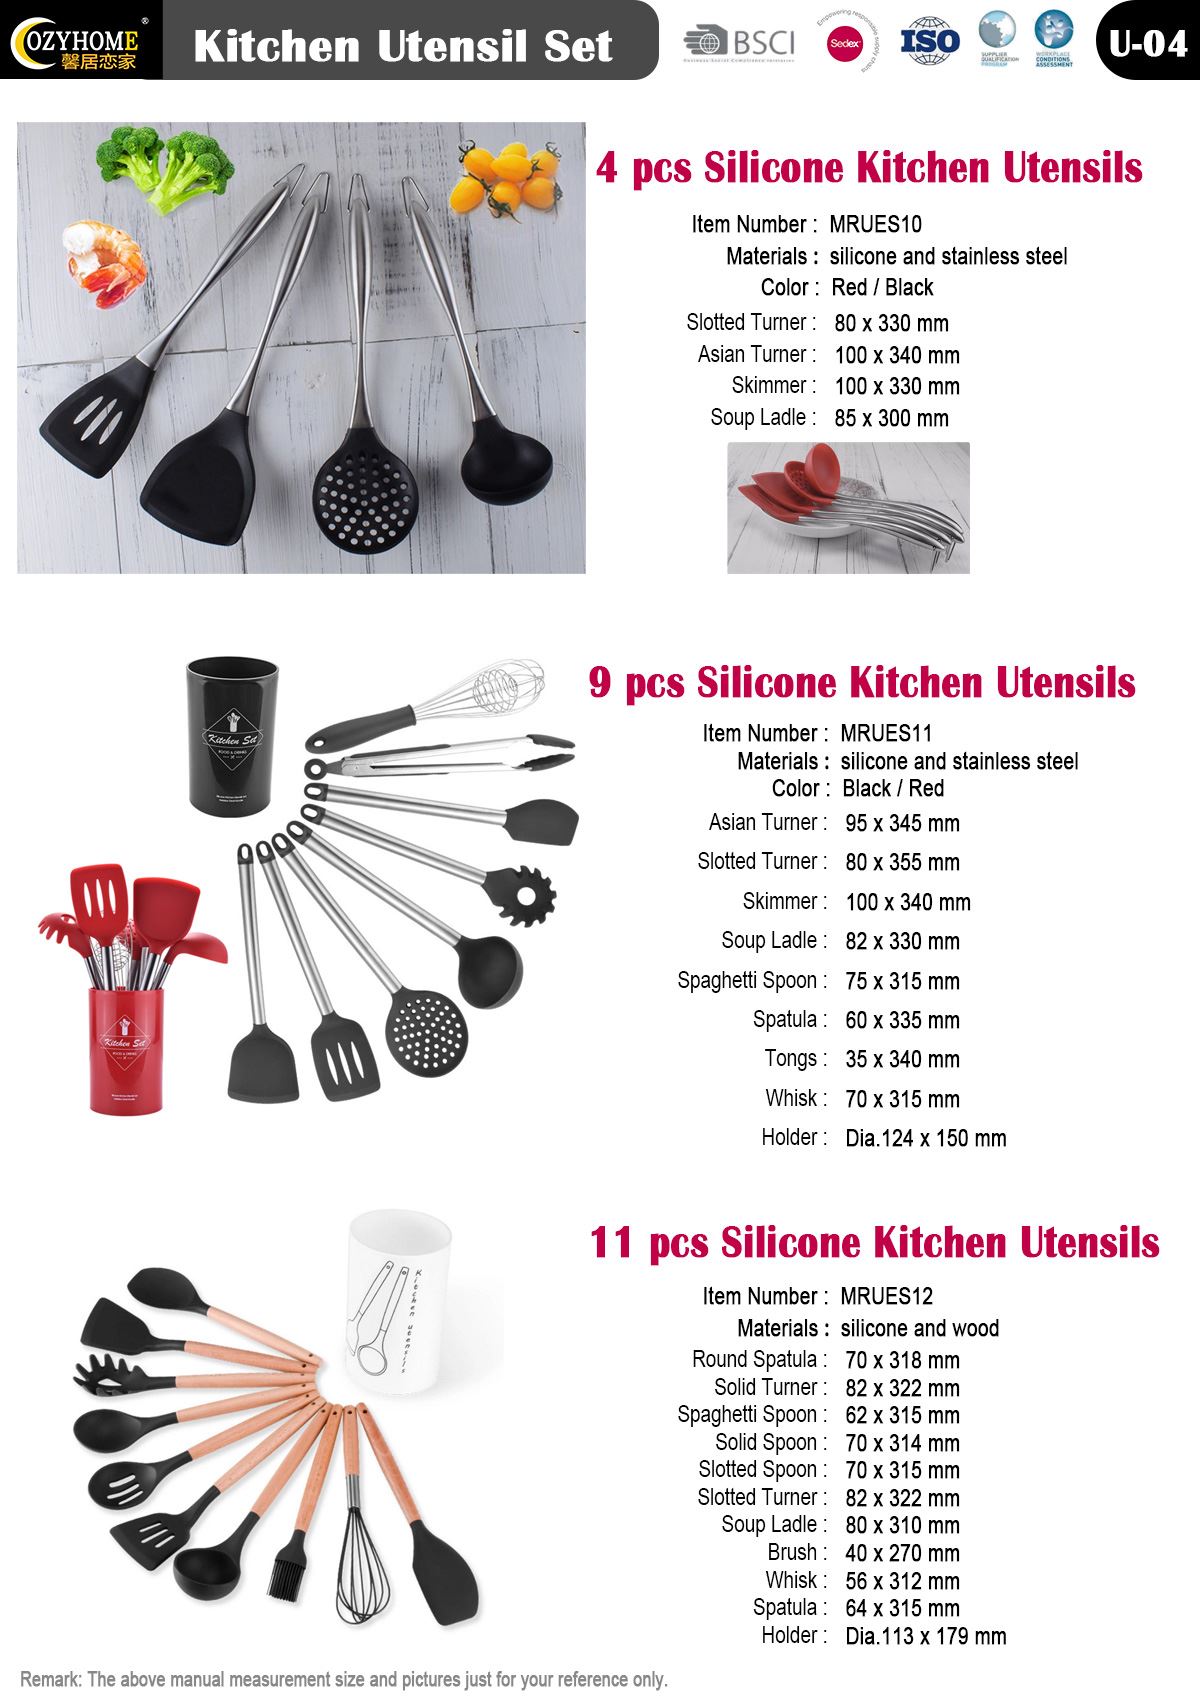 Silicone Kitchen Utensils 2019 Pages: 04